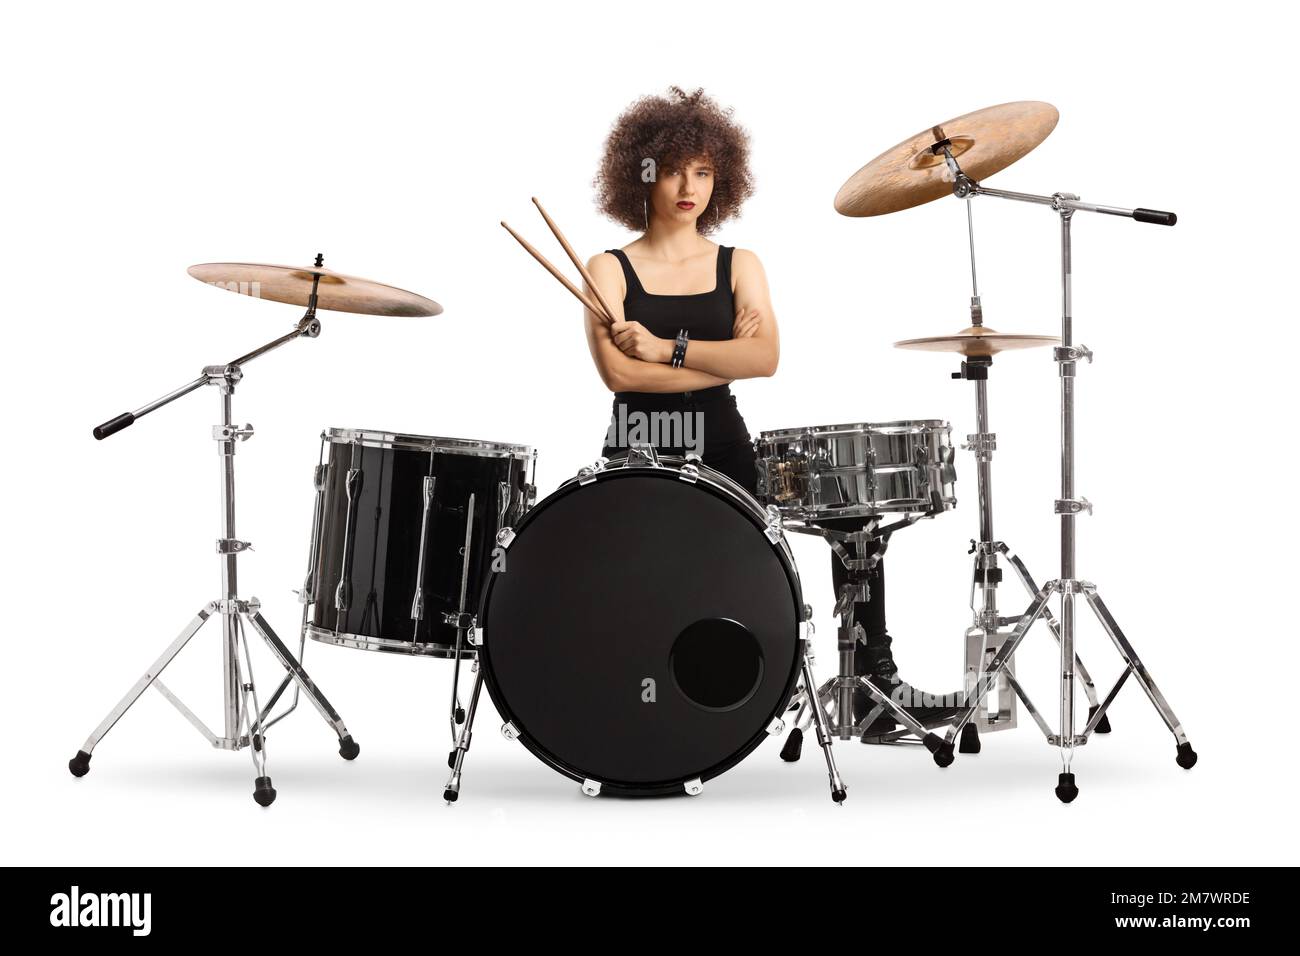 Female drummer sitting and holding drumsticks isolated on white background Stock Photo